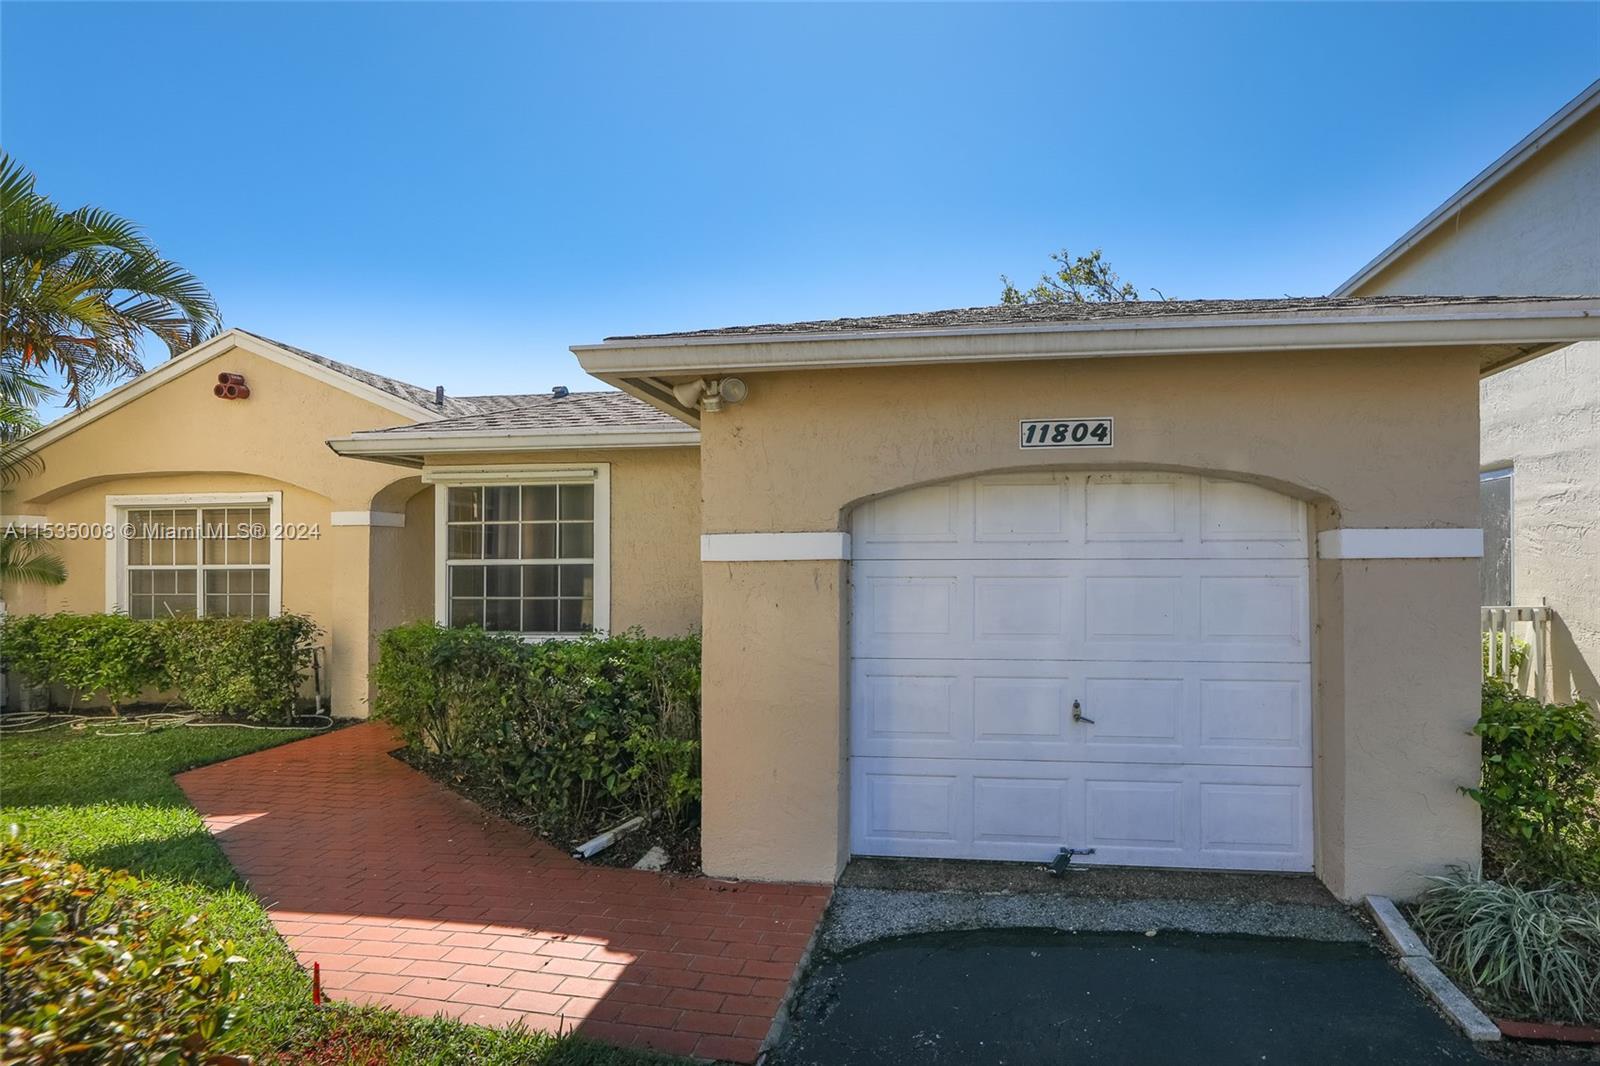 Photo of 11804 NW 13th St in Pembroke Pines, FL